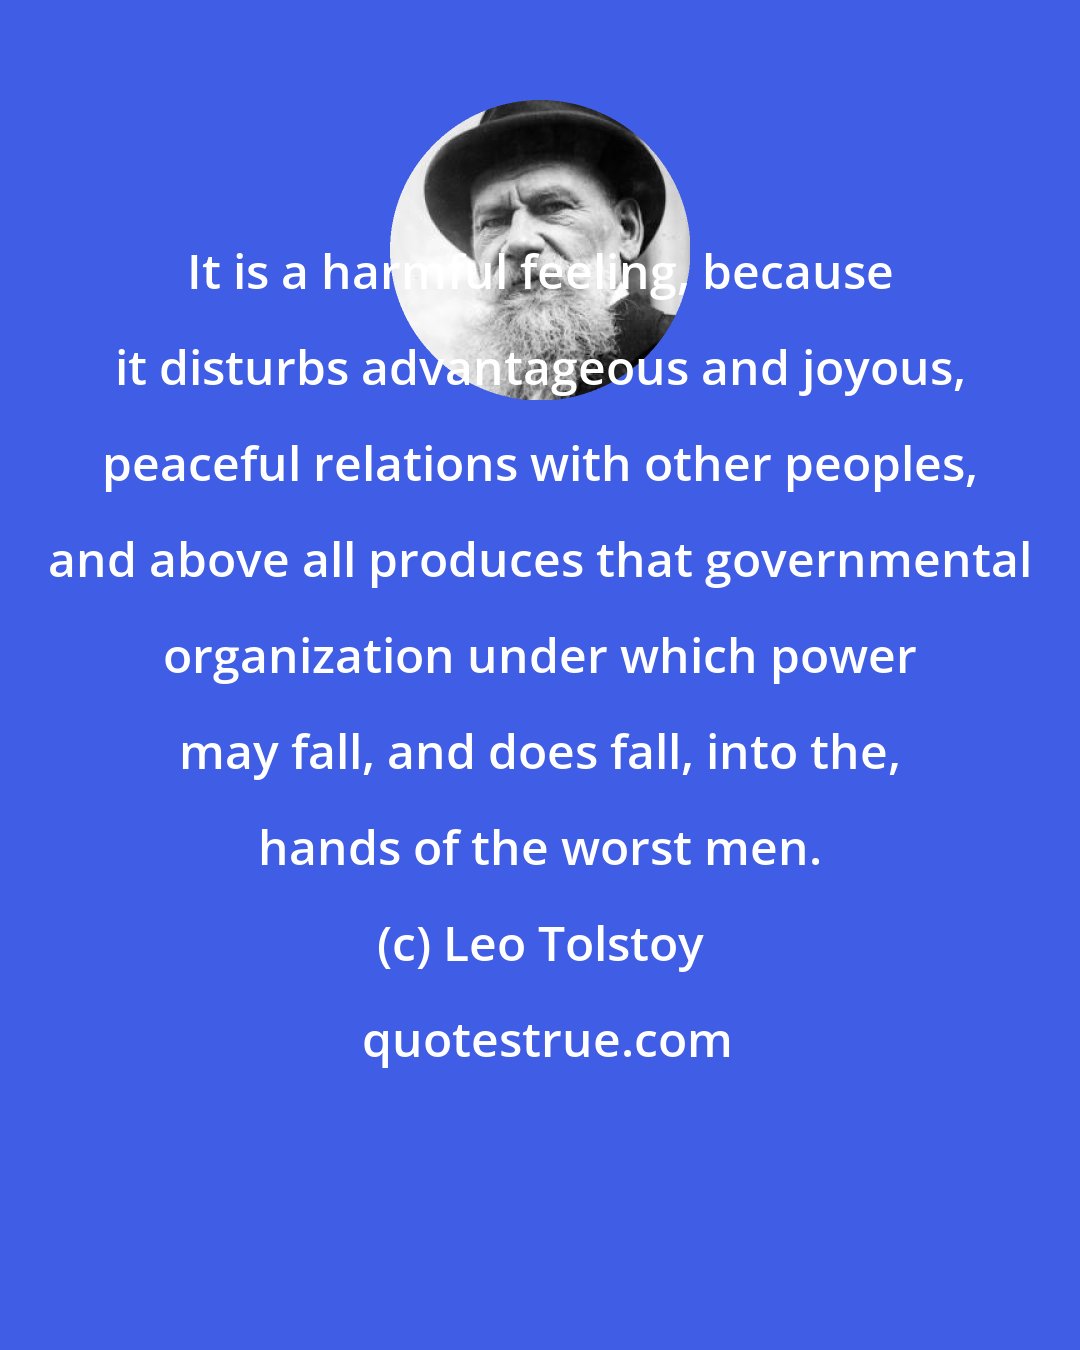 Leo Tolstoy: It is a harmful feeling, because it disturbs advantageous and joyous, peaceful relations with other peoples, and above all produces that governmental organization under which power may fall, and does fall, into the, hands of the worst men.